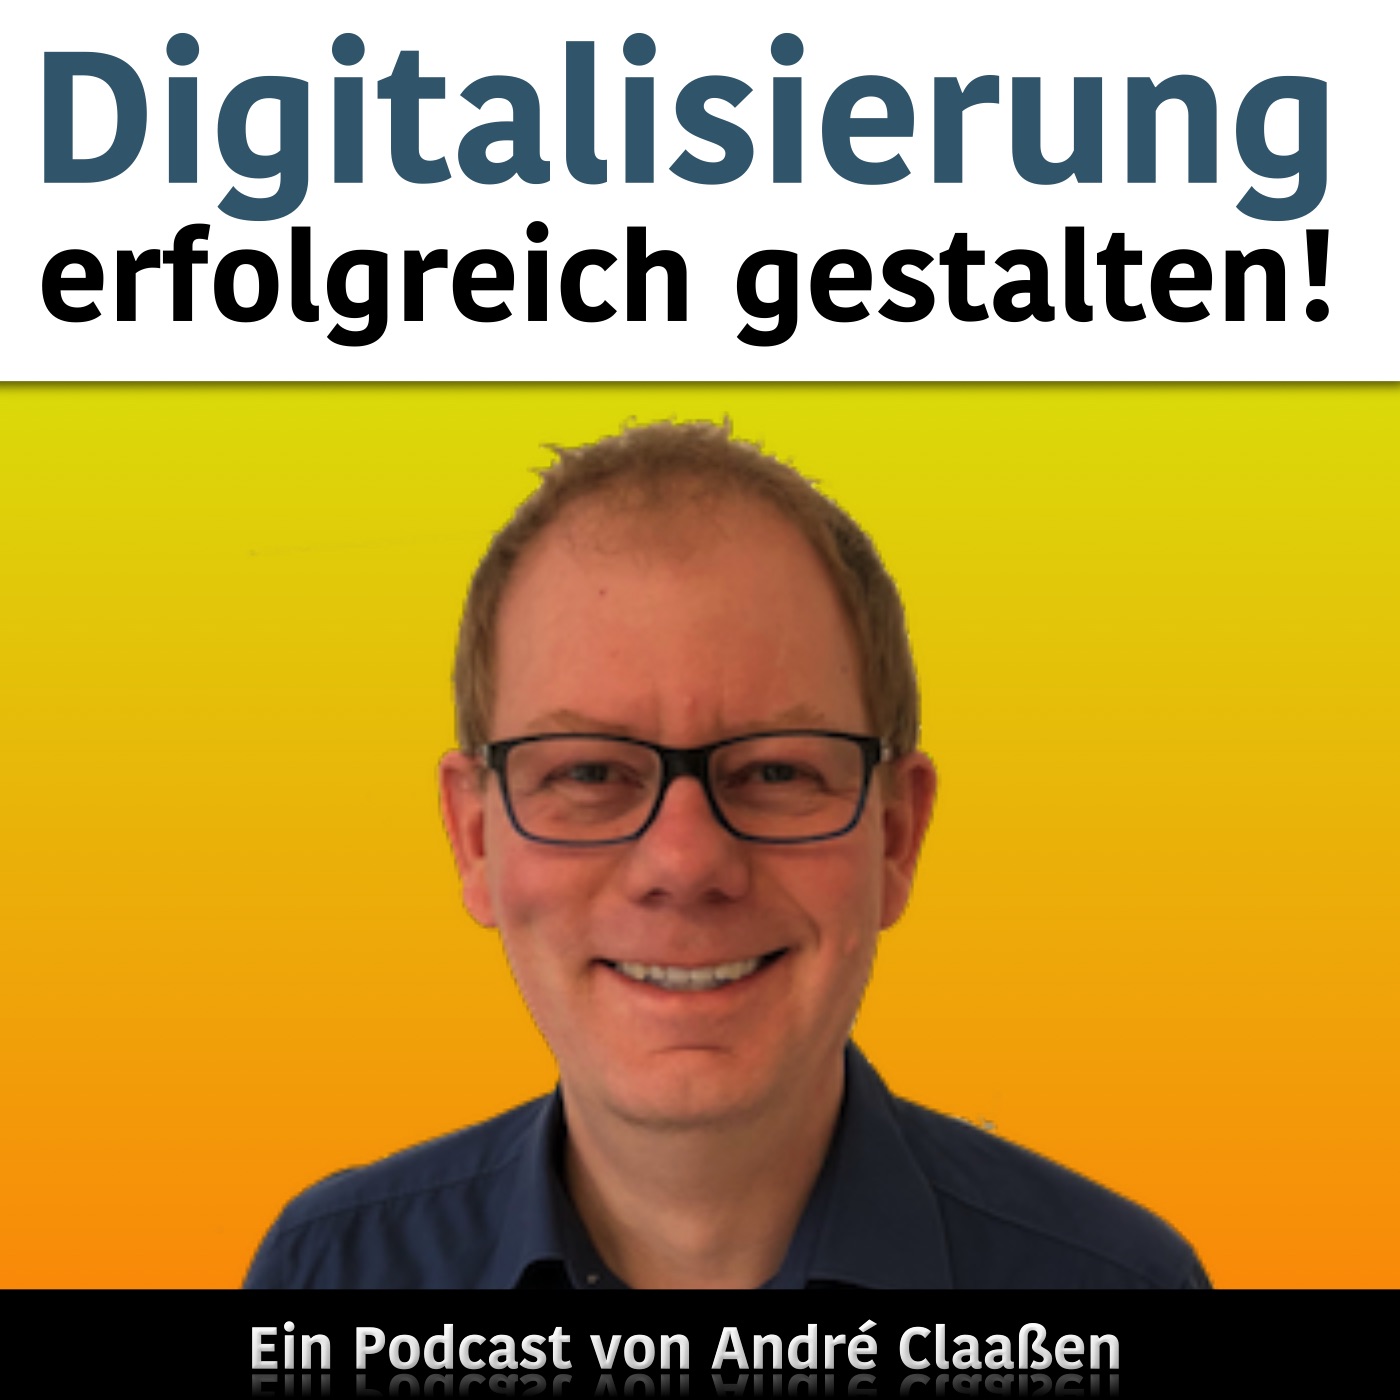 podcast/digital/podcast-episode-1-was-ist-digitalisierung/podcast-cover.jpg